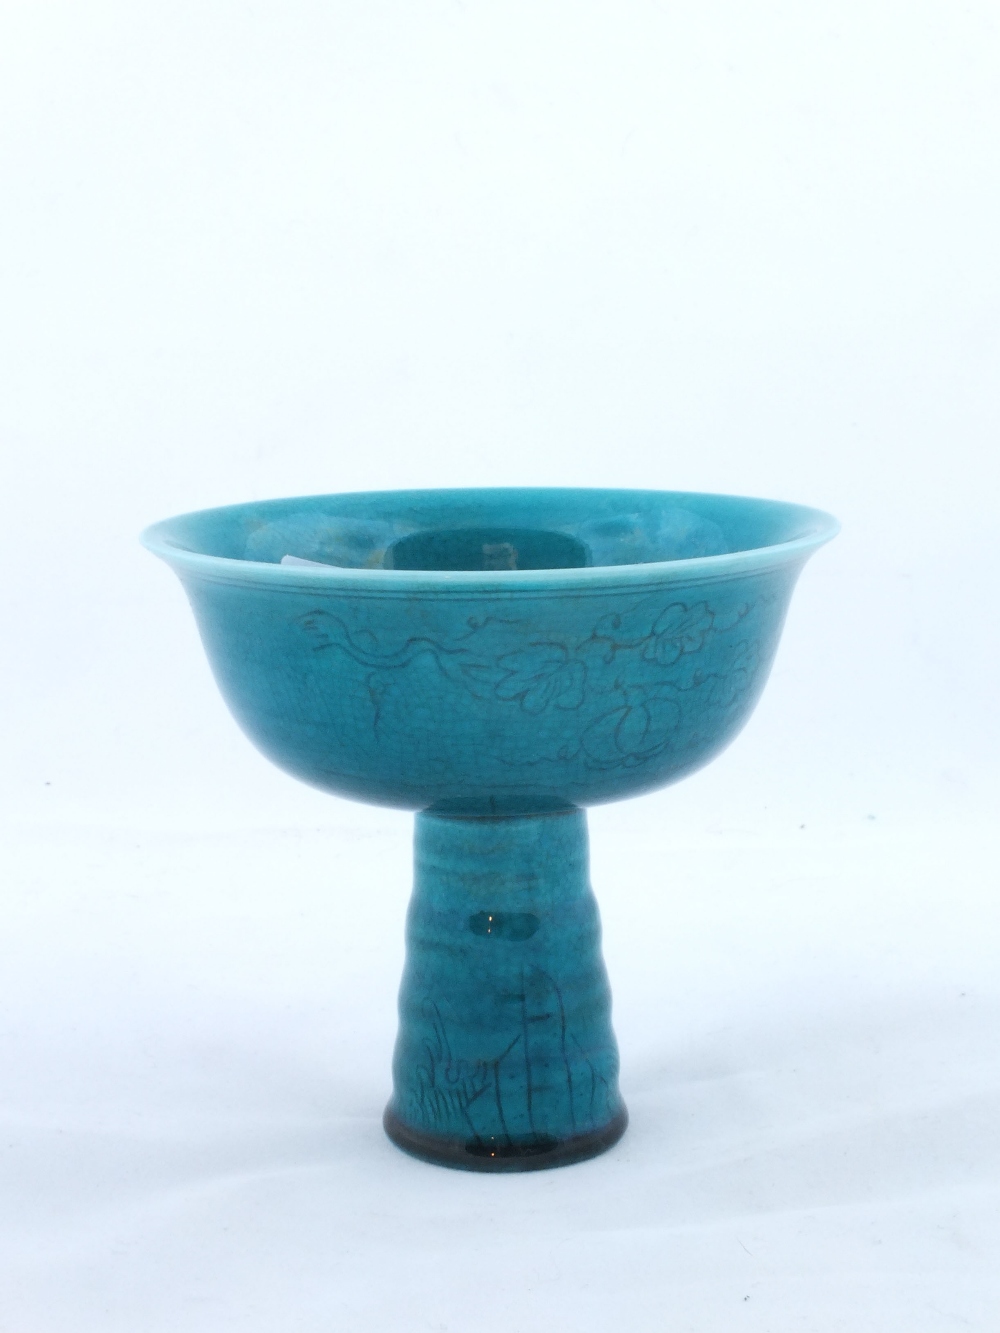 A Chinese Turquoise glaze stem bowl - six character mark